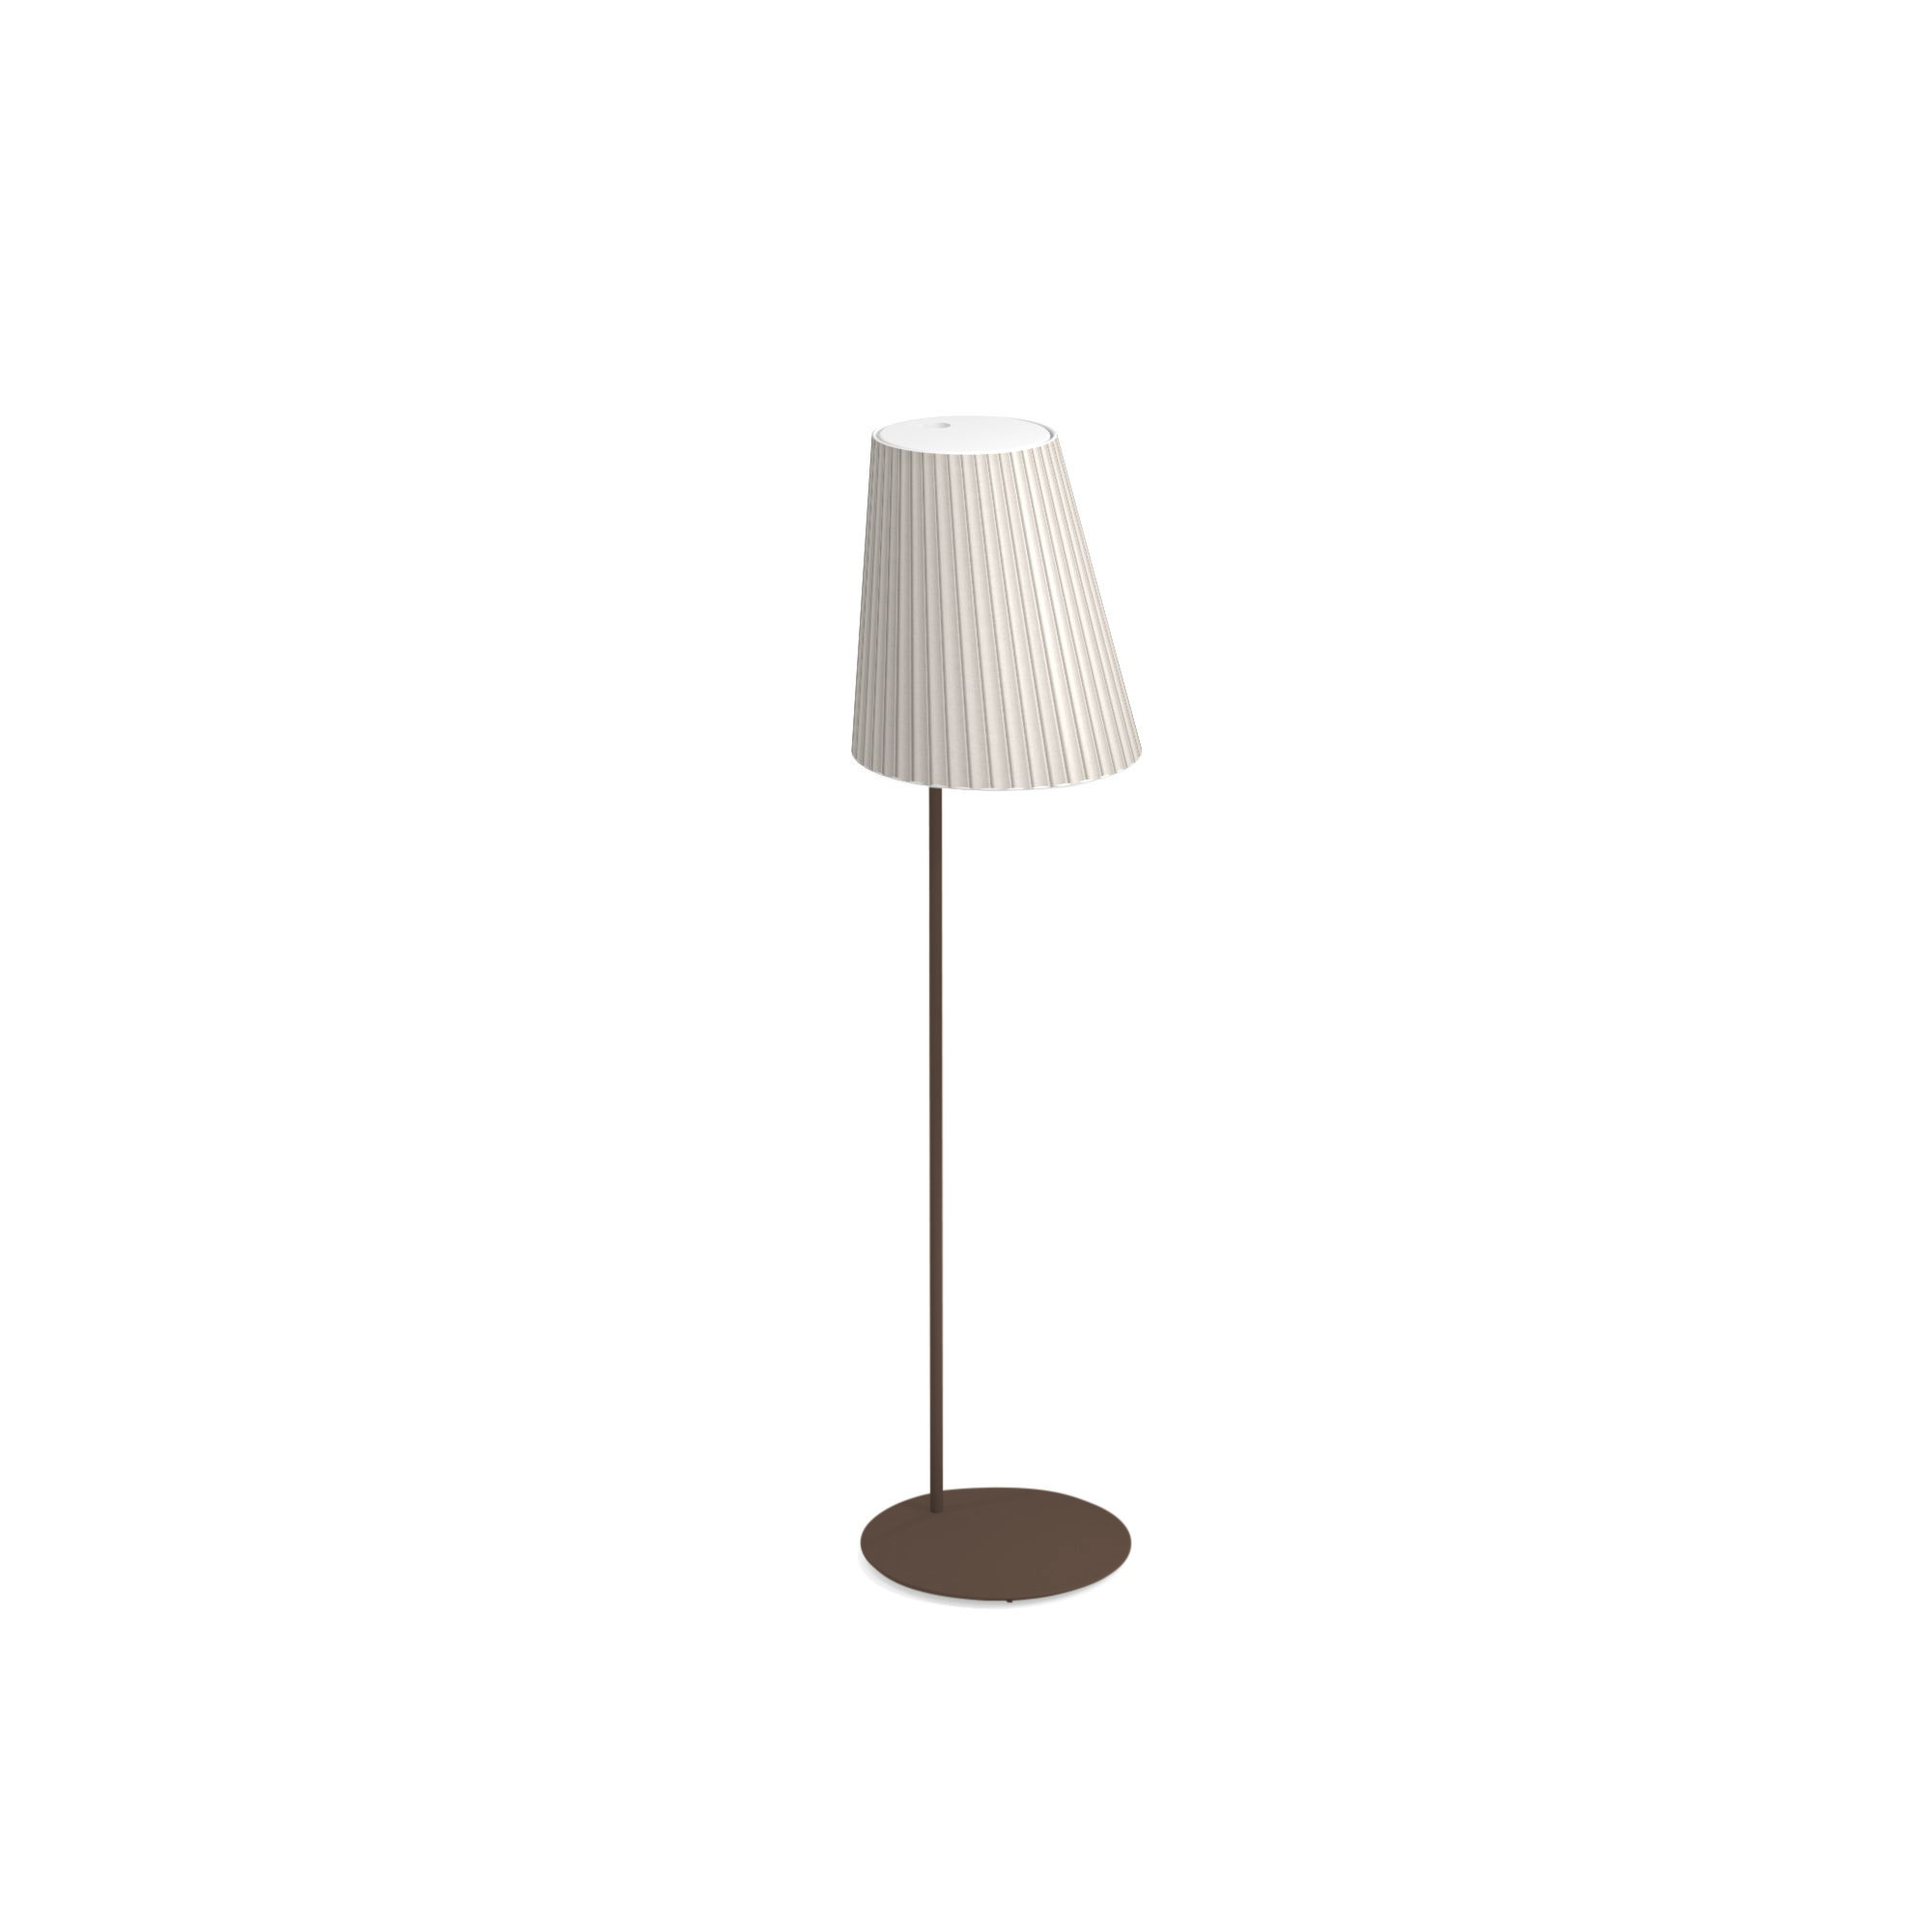 Garden Rechargeable Floor Lamp Outside In Steel Collection throughout sizing 2000 X 2000